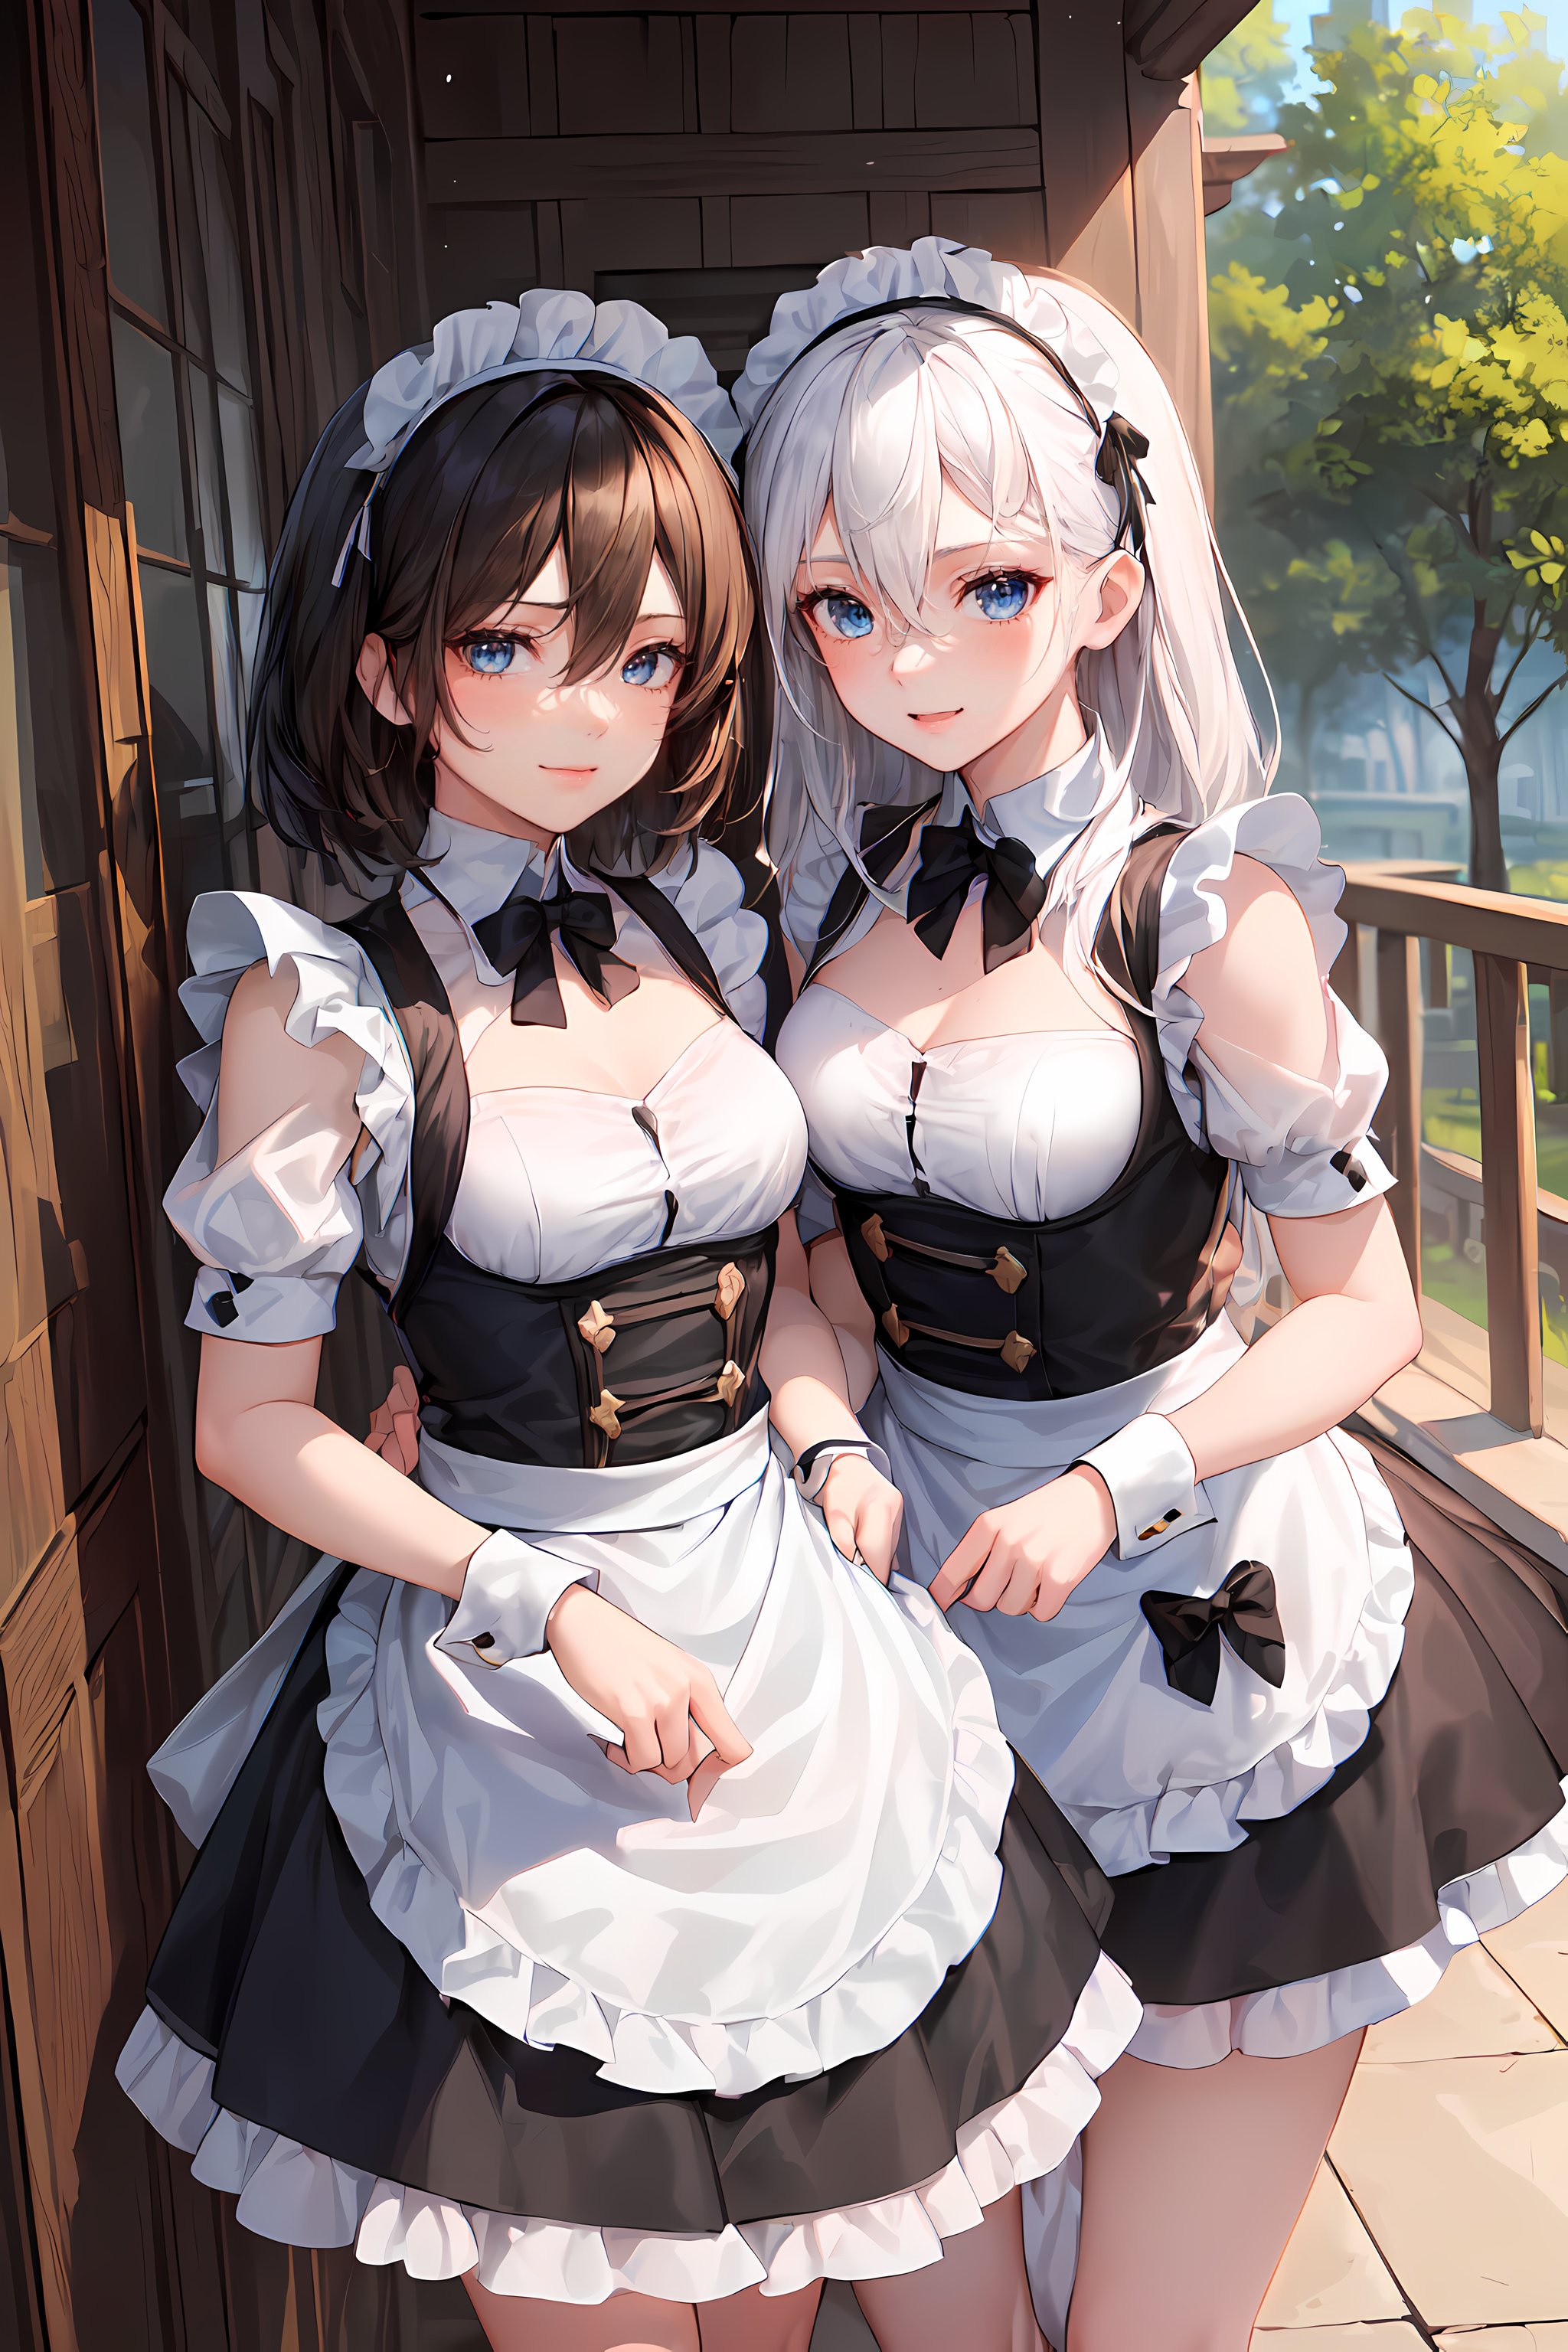 Anime 2048x3072 AI art maid maid outfit original characters anime girls anime shoulder length hair black hair white hair two women artwork digital art portrait display looking at viewer blushing standing bow tie trees sunlight